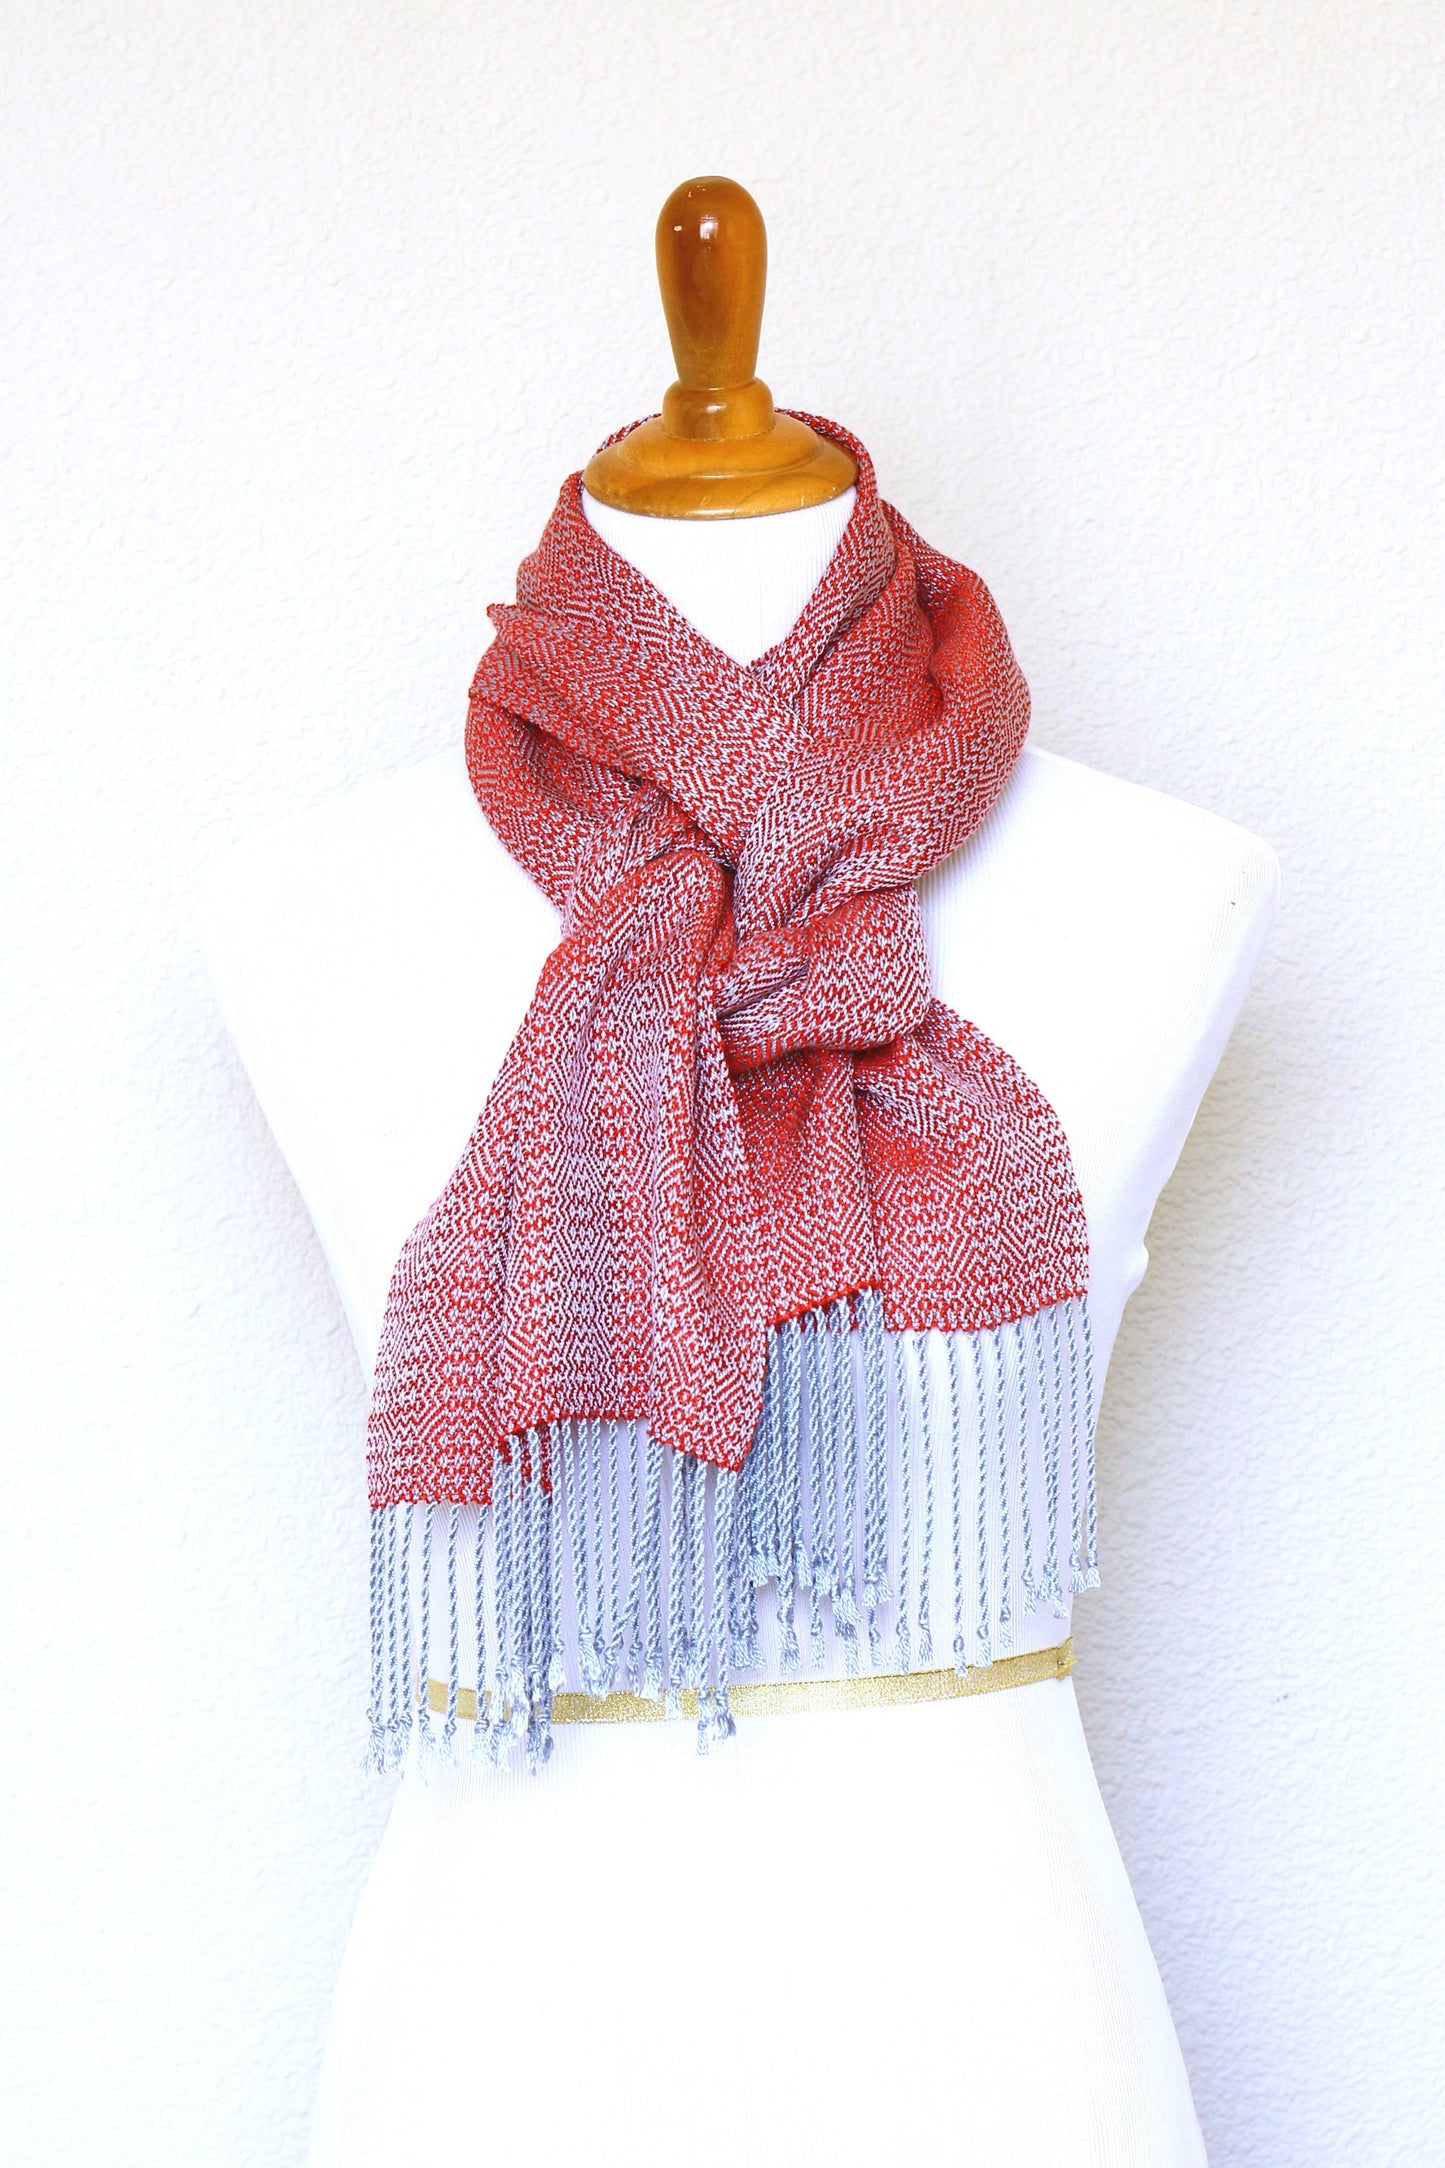 Woven scarf in red and silver color, eucalyptus scarf with fringe